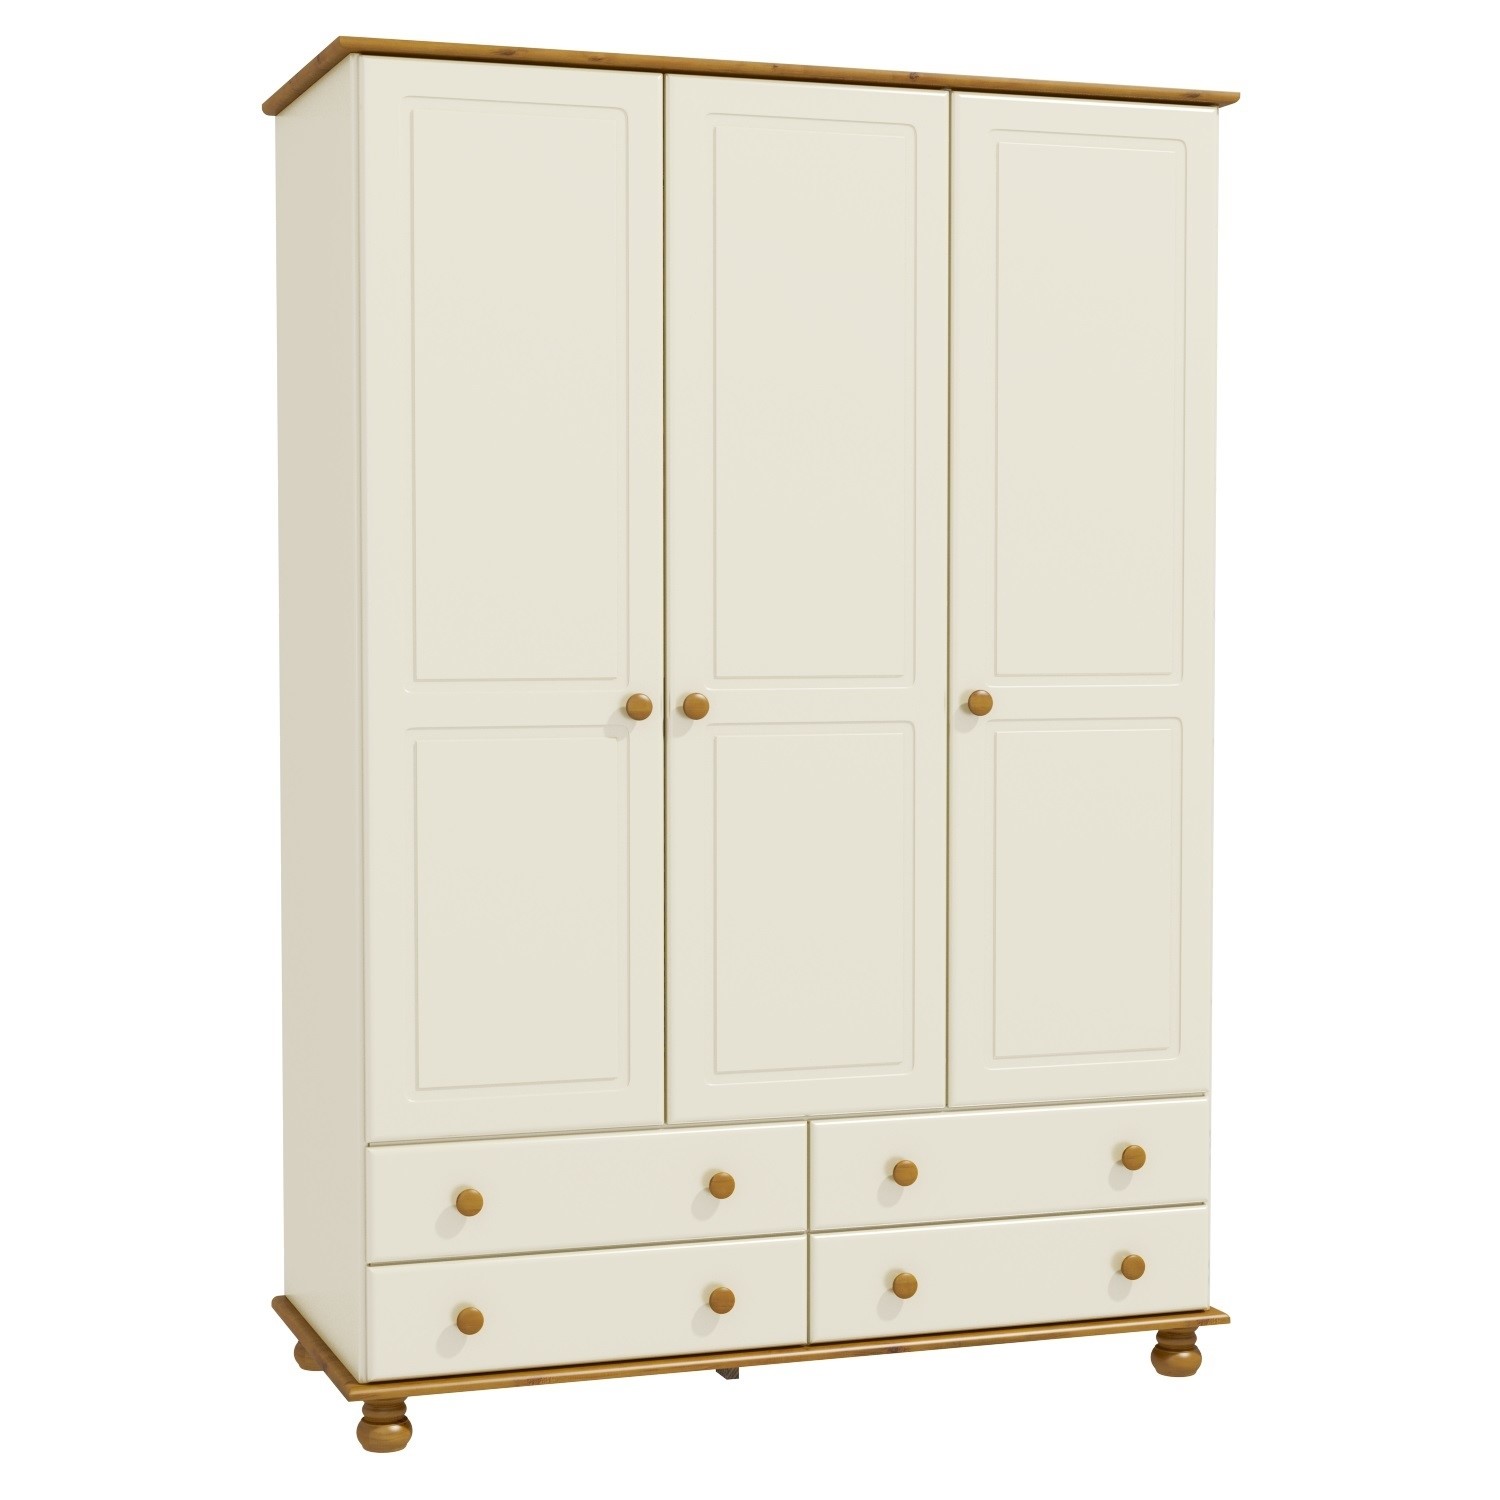 Read more about Cream and pine painted 3 door triple wardrobe with drawers hamilton